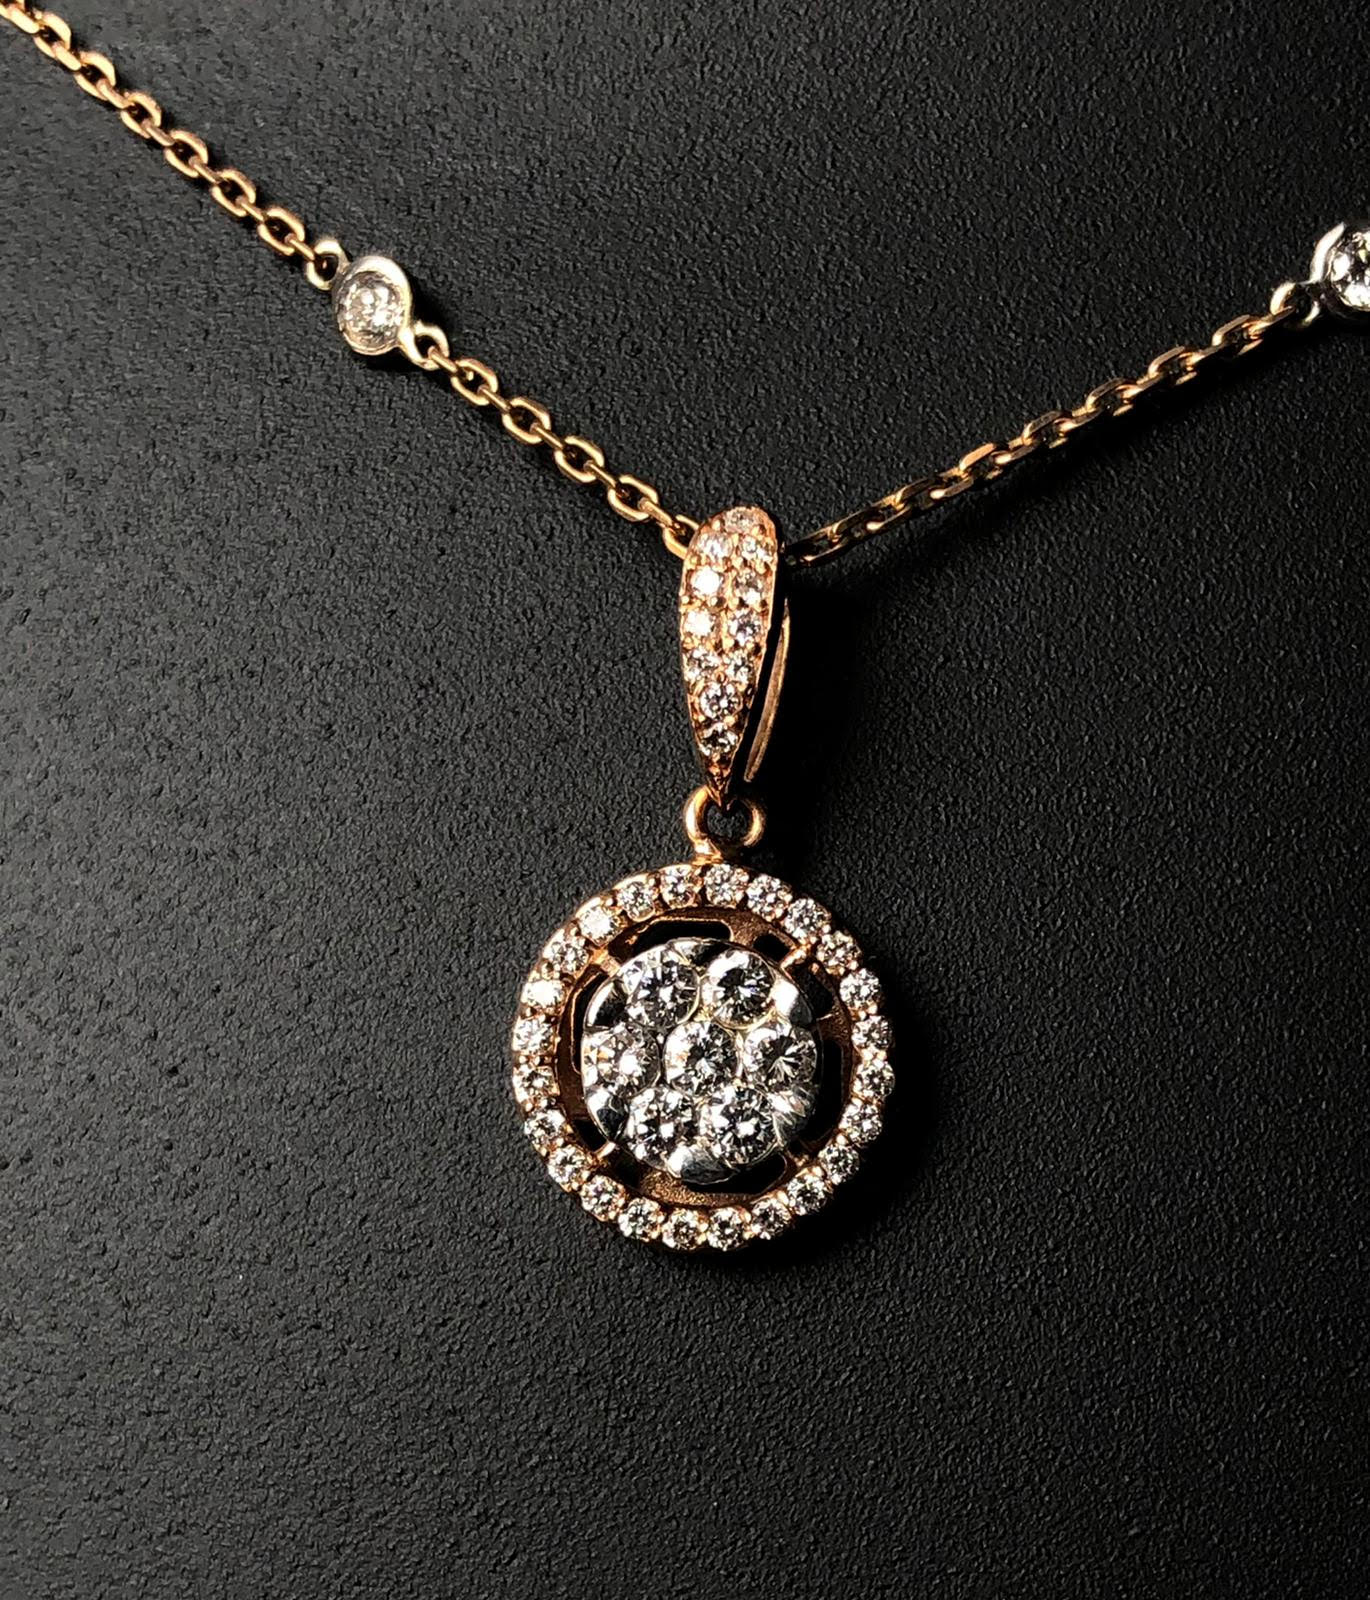 Beautiful 2.08 Carat Diamond Necklace and Earrings set with 18k gold - Image 9 of 12